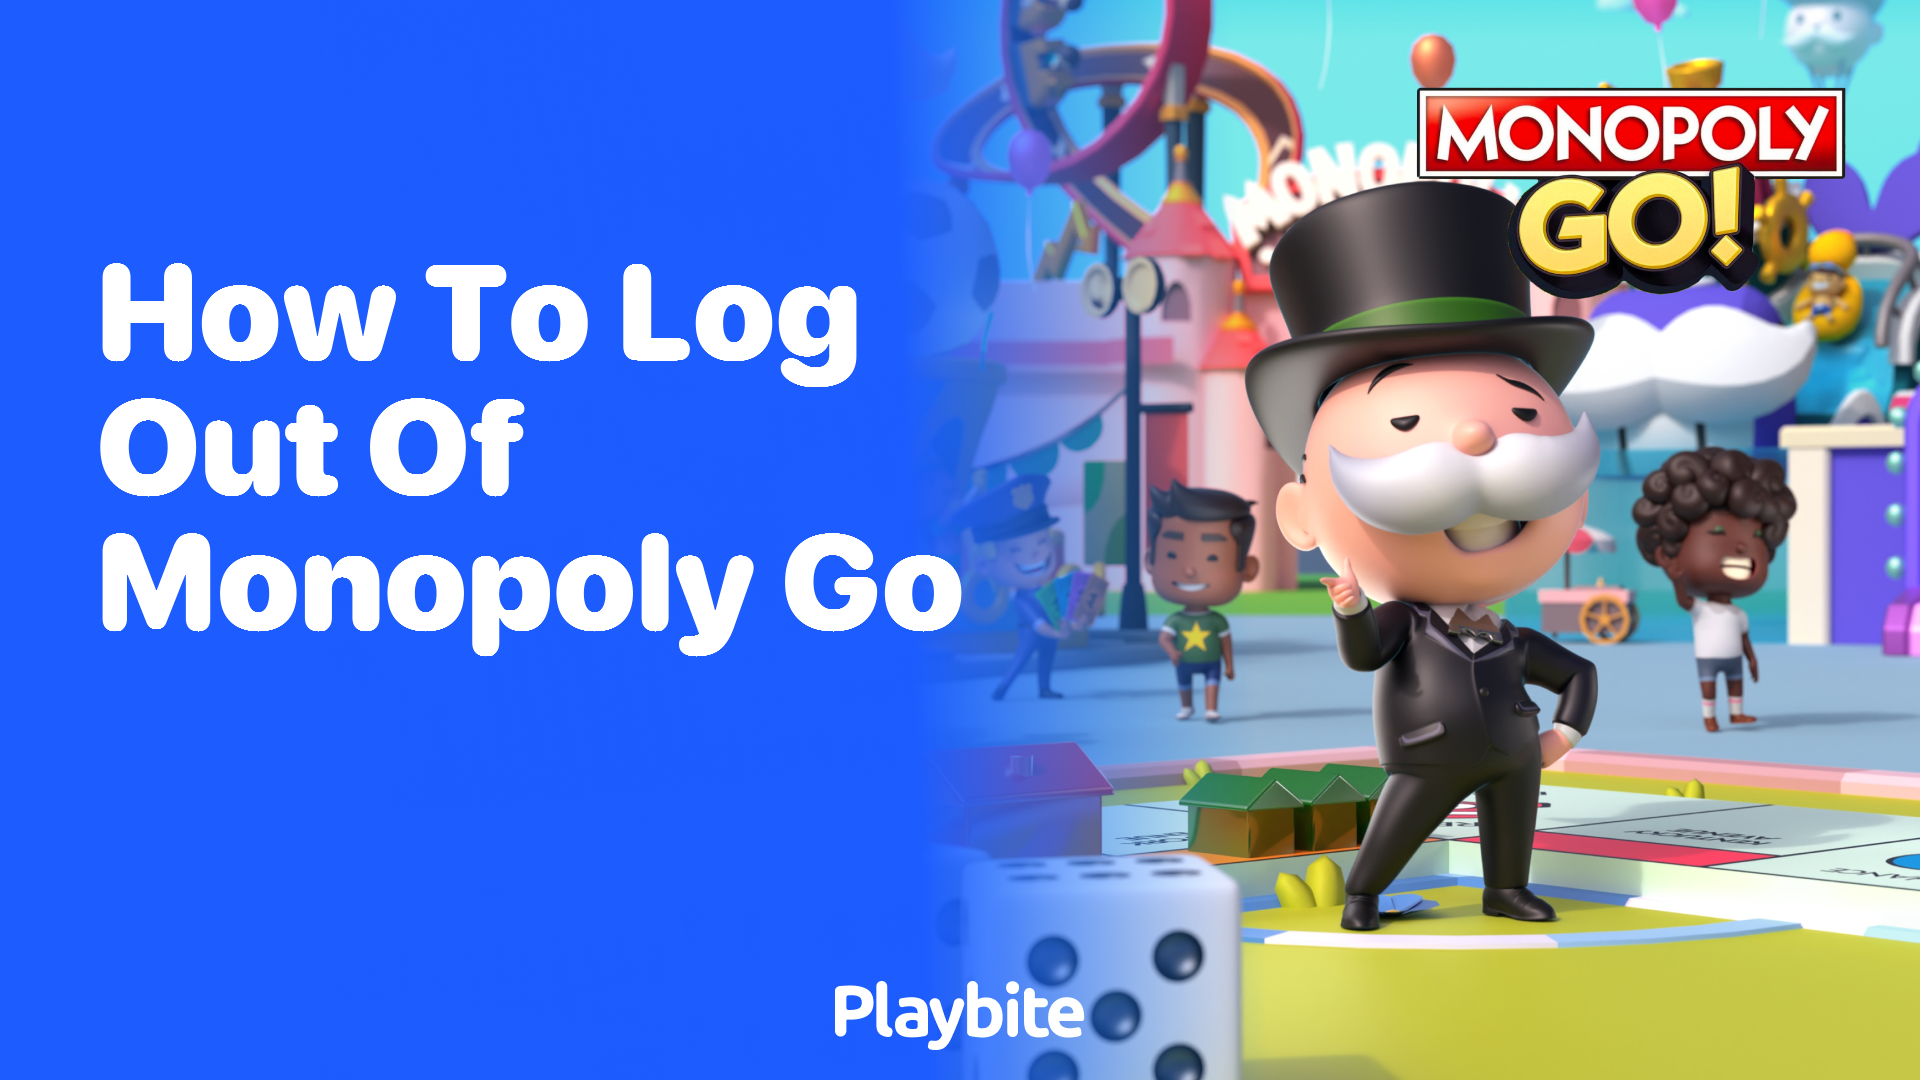 How to Log Out of Monopoly Go